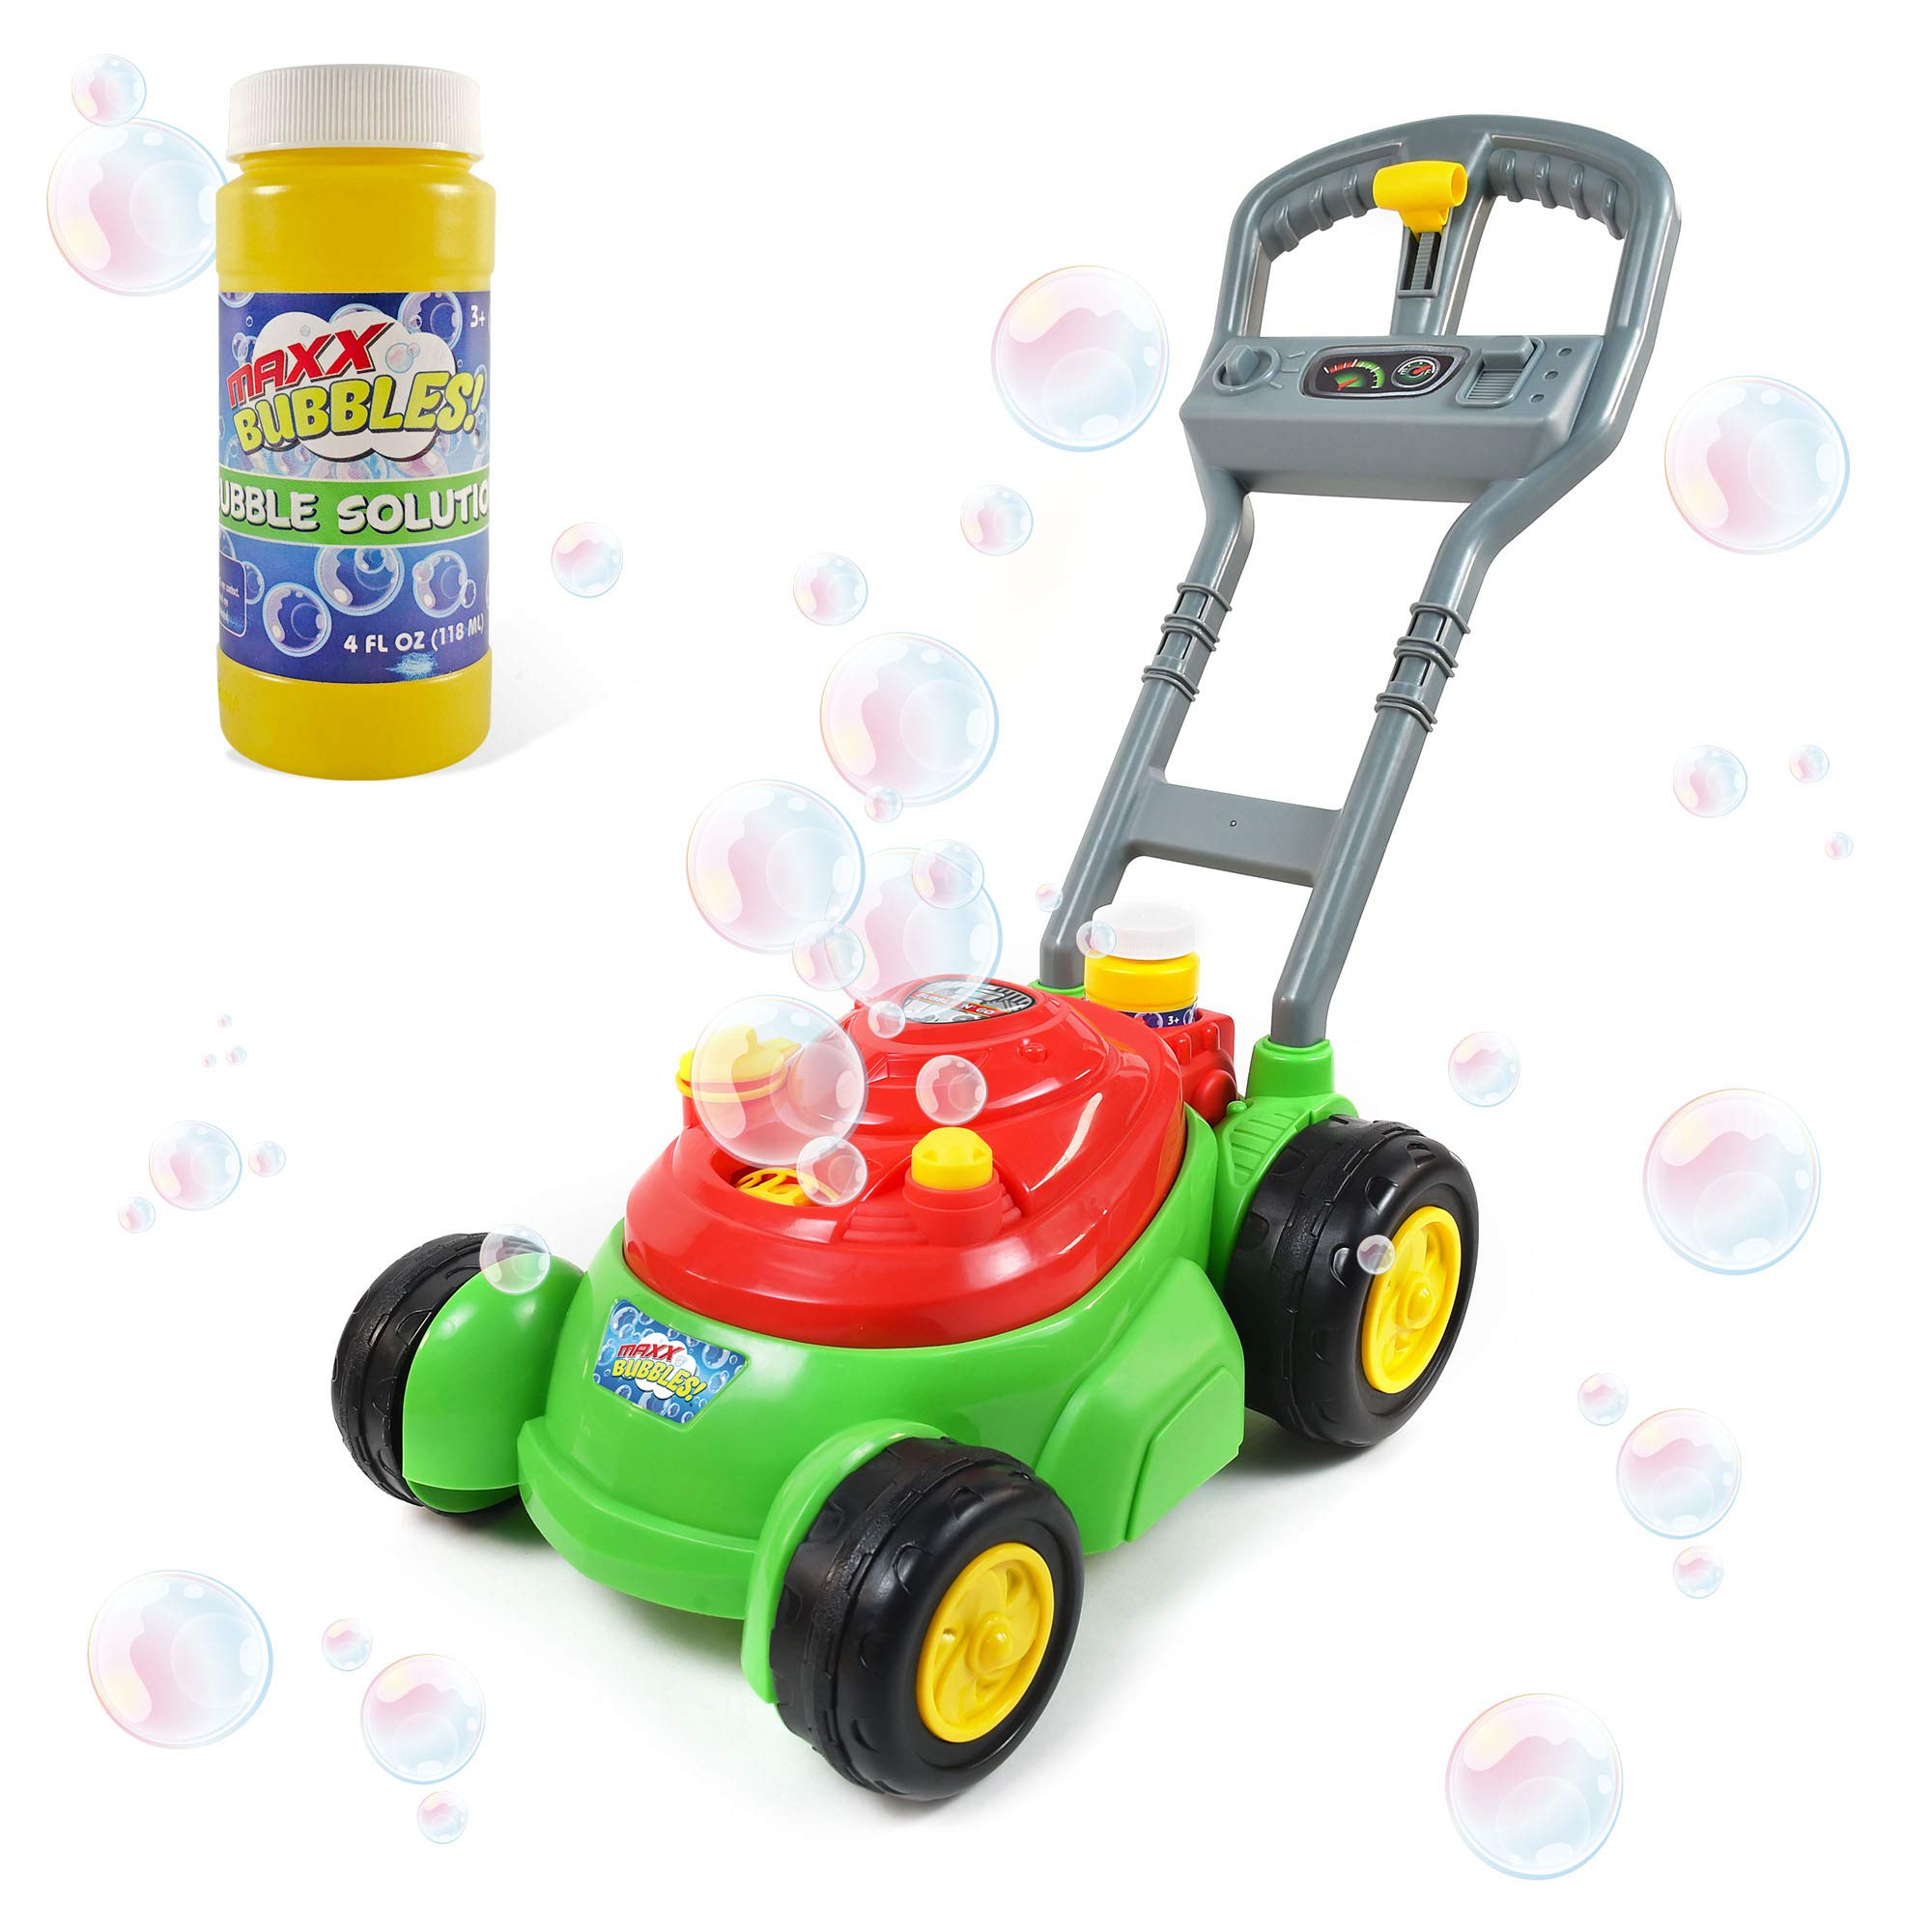 Maxx Bubbles Deluxe Bubble Lawn Mower Toy w/ 4oz Bubble Solution $11 + Free Shipping w/ Prime or on $35+